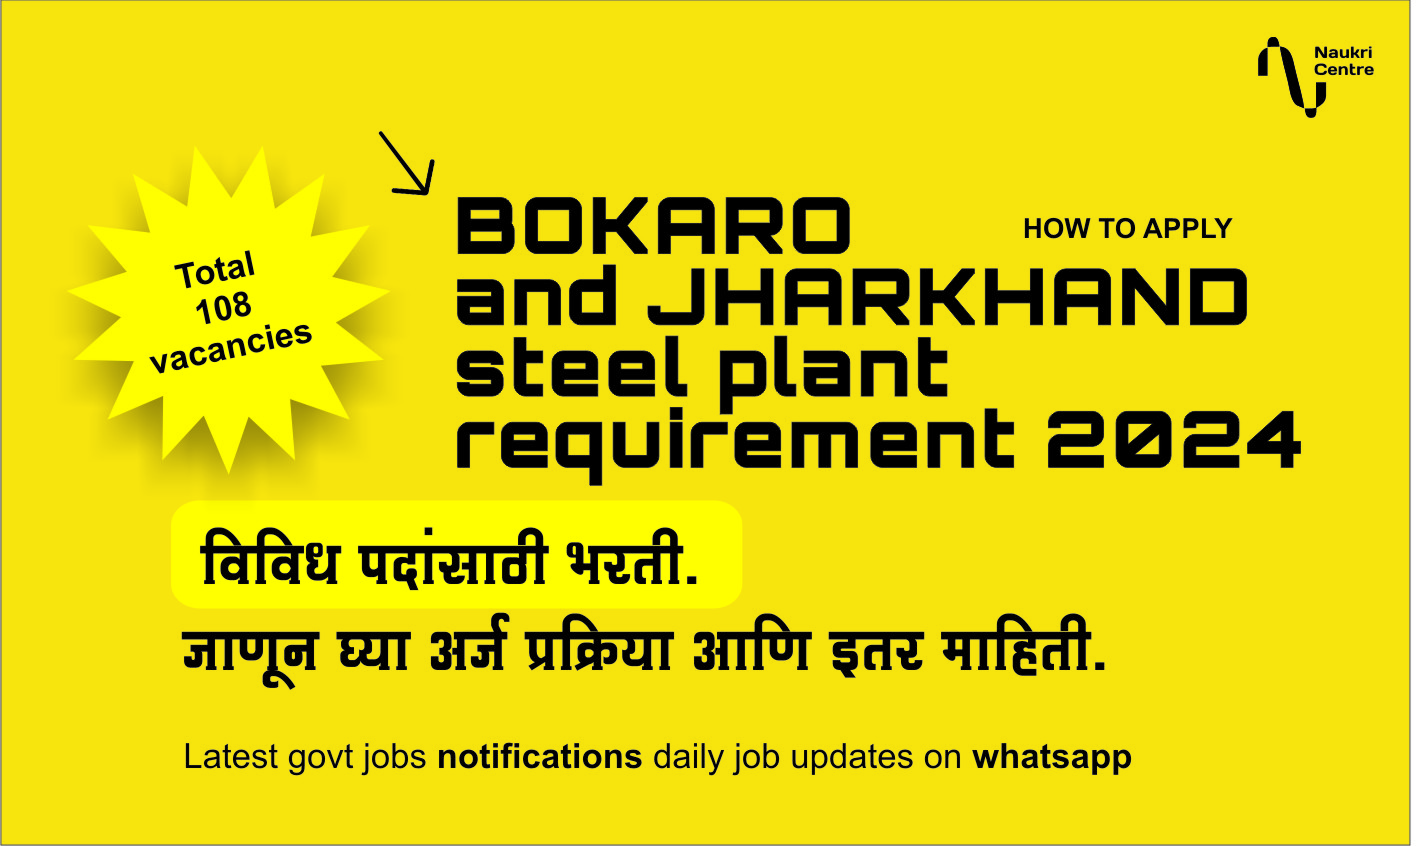 BOKARO and JHARKHAND steel plant requirement 2024